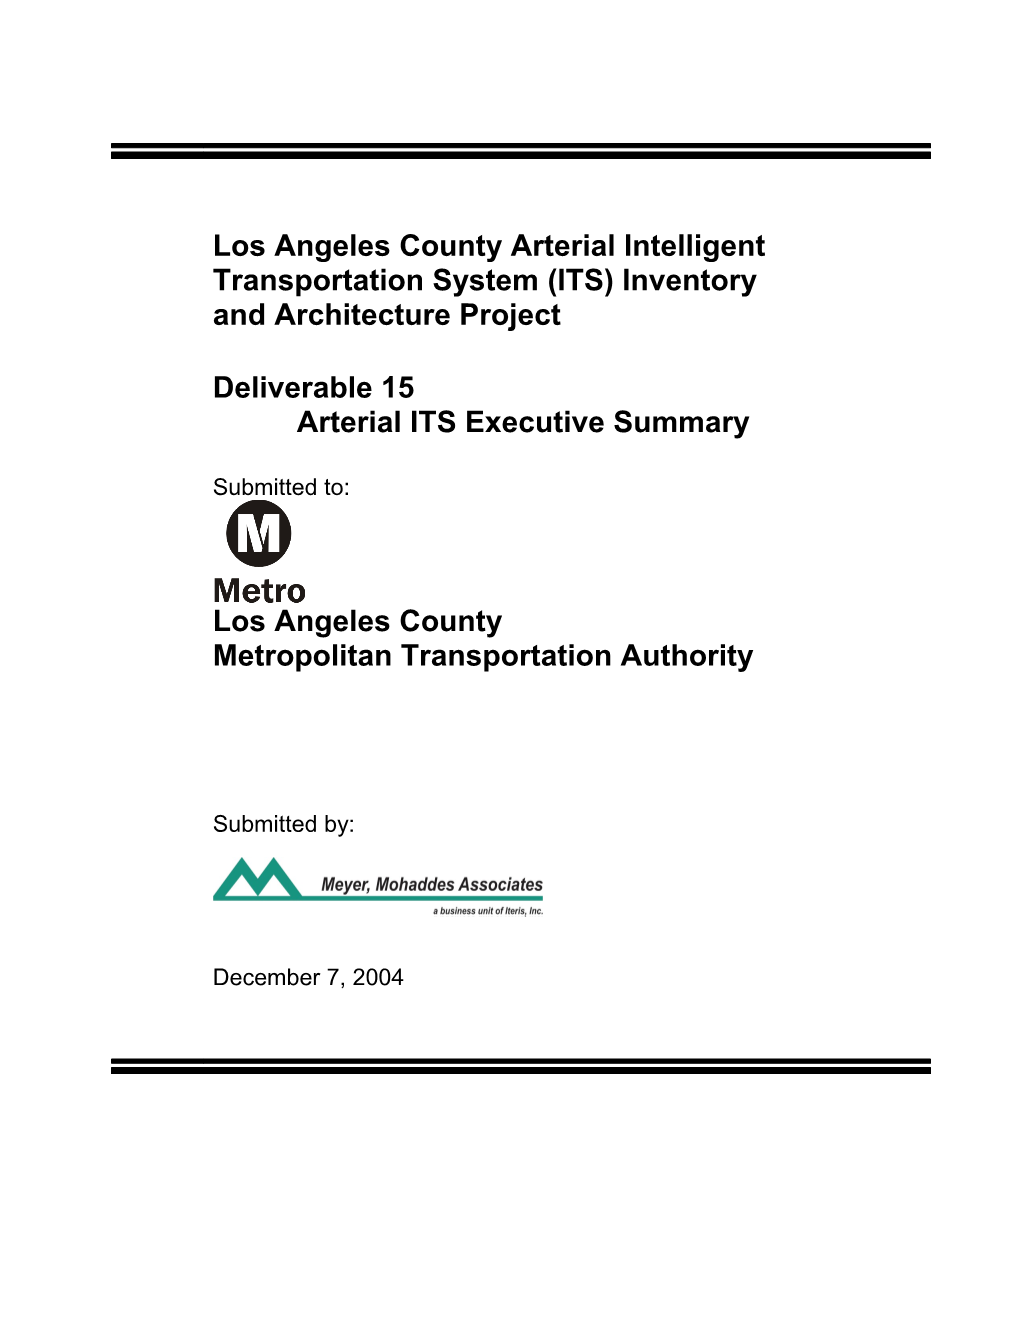 Los Angeles County ITS Architecture Update Executive Summary